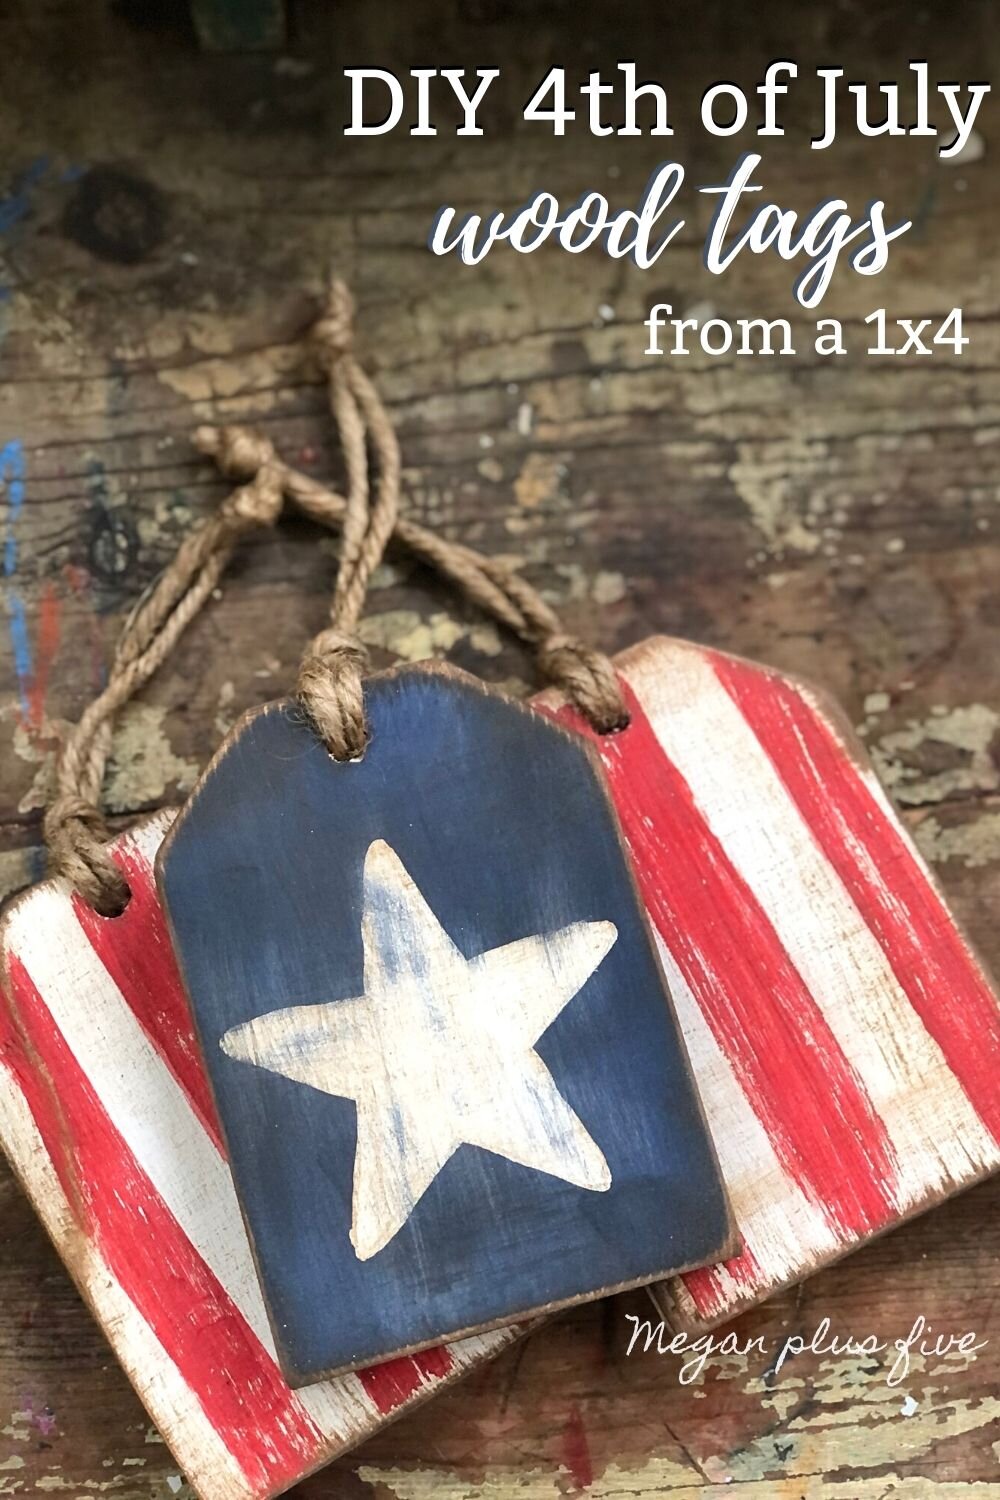 DIY wood tags for Fourth of July made from a 1x4. Tiered tray rustic farmhouse wooden tags for the 4th of July. Red white and blue patriotic farmhouse rustic DIY decorations for coffee bar.